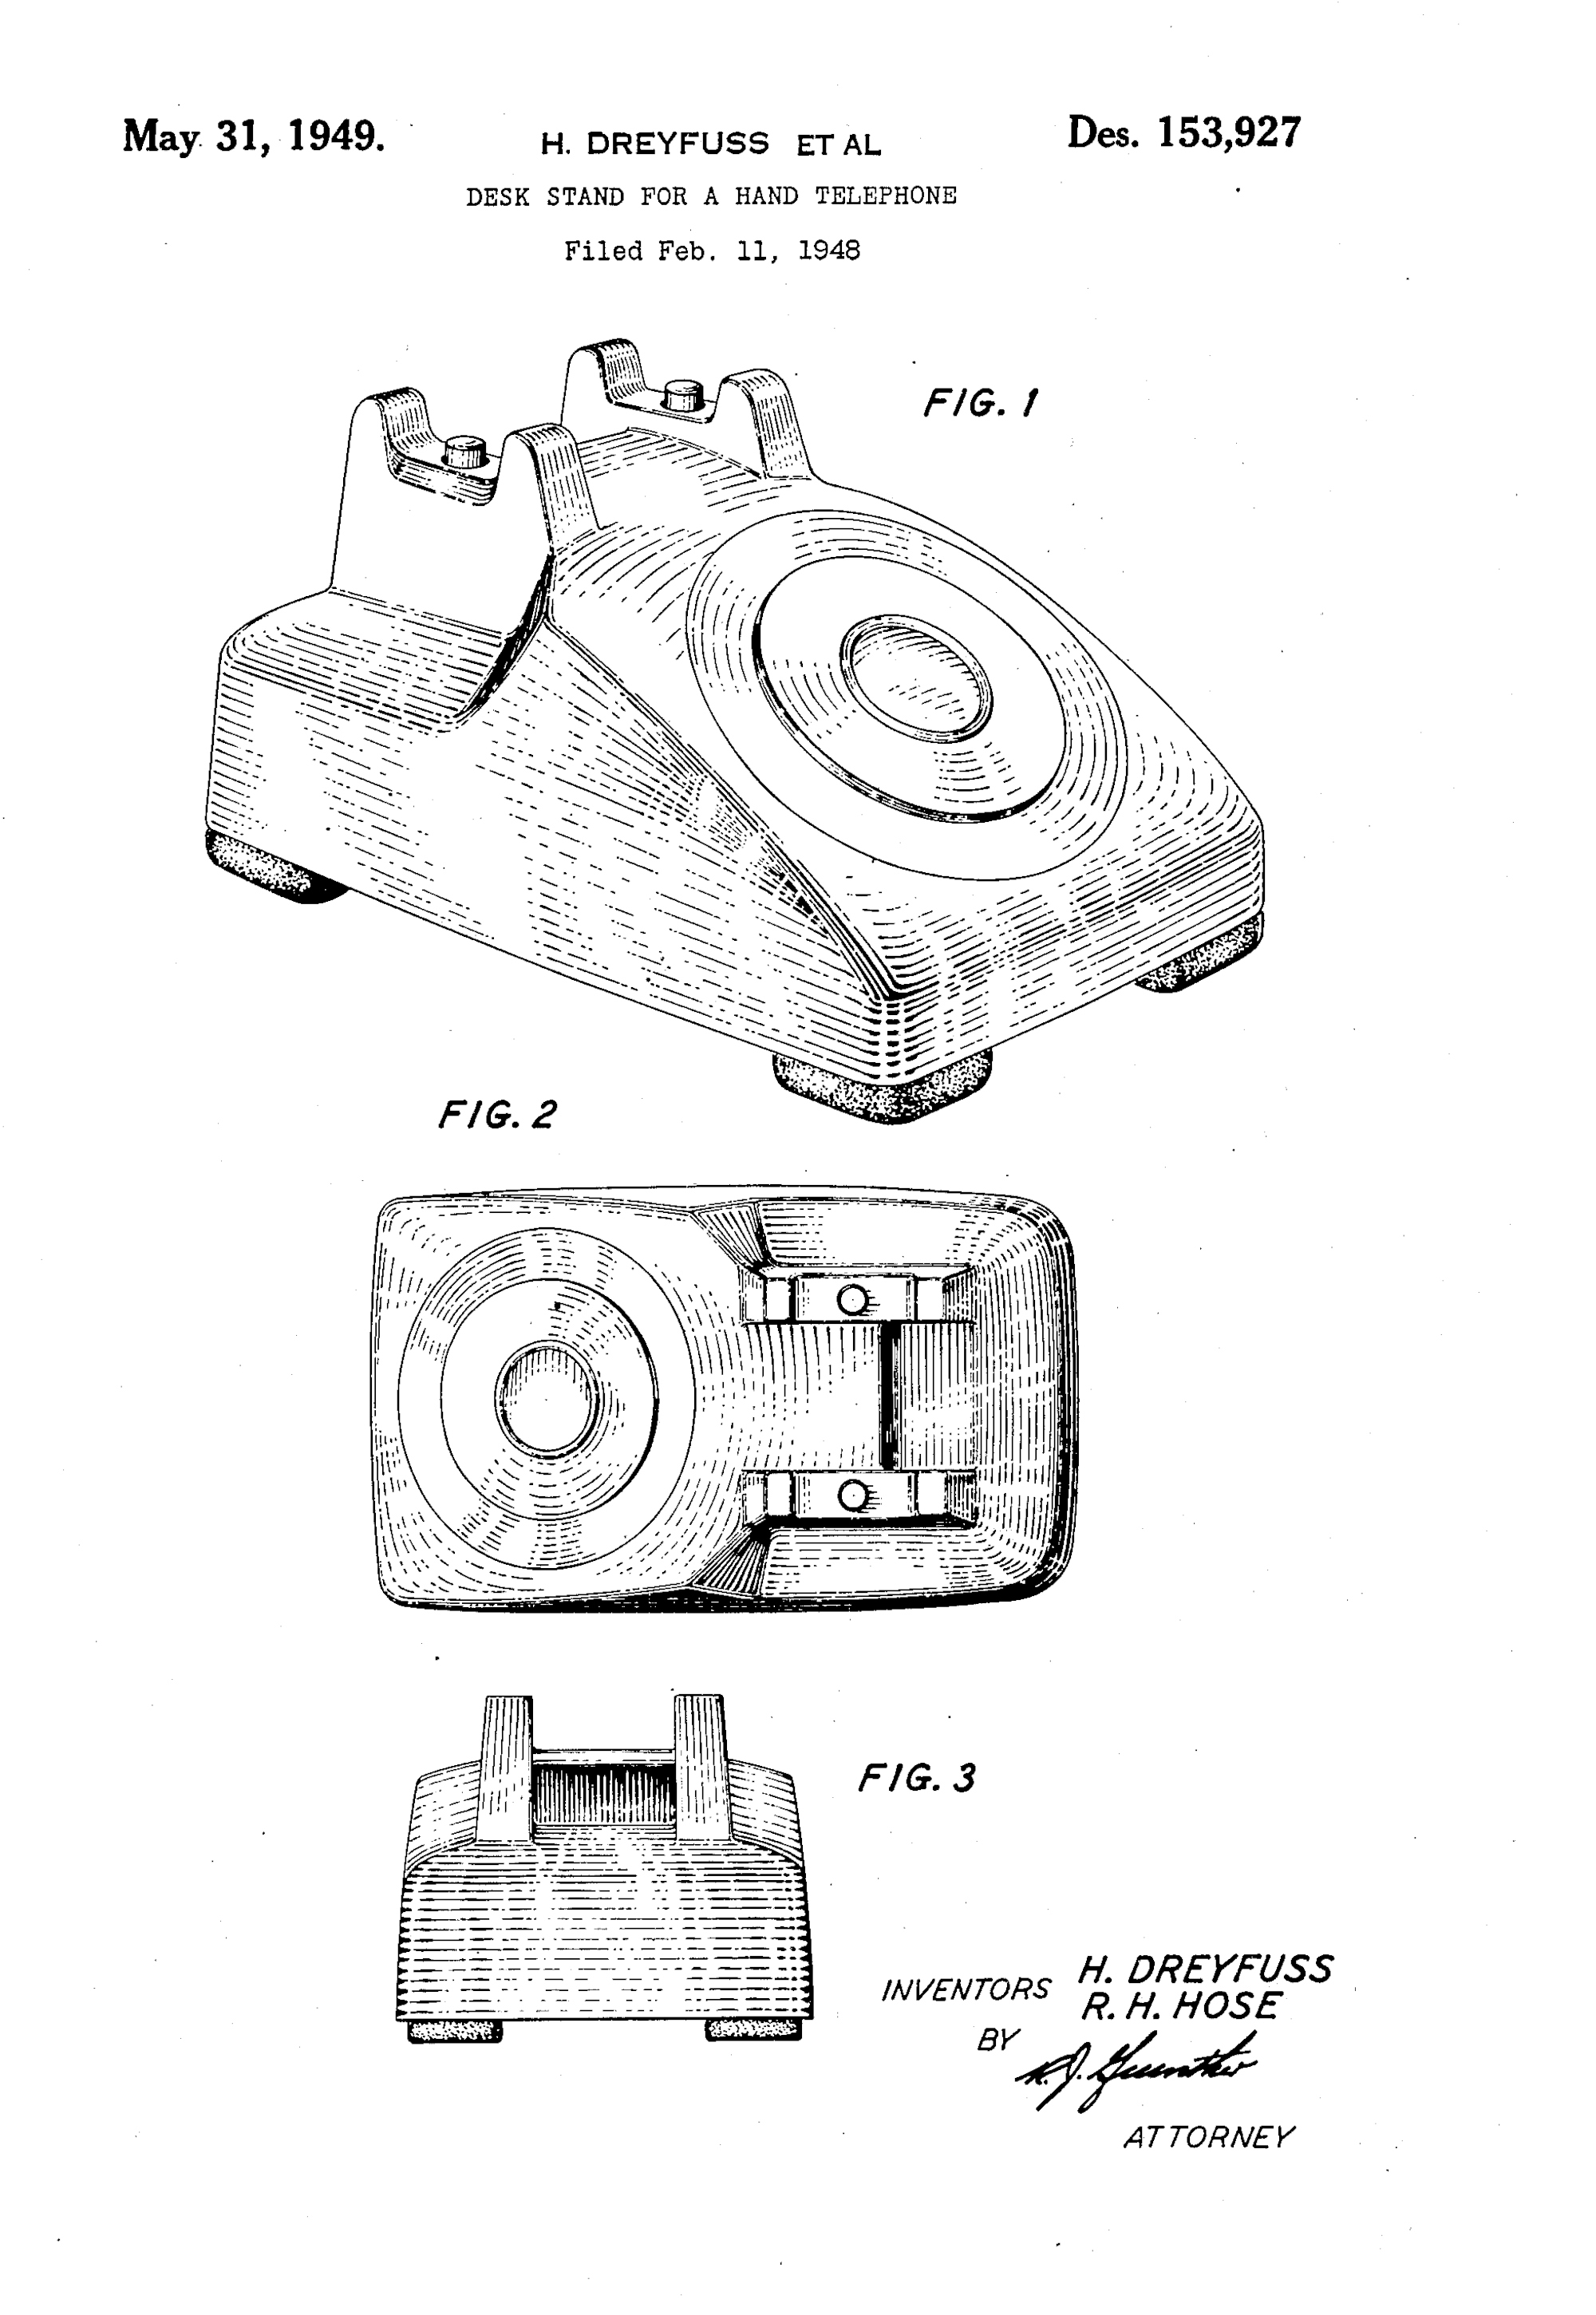 Desk Stand for a Hand Telephone, Henry Dreyfuss, Robert H. Hose, for Bell Telephone Laboratories, 1948/1949. Patent Number: USD: 153,927, U.S. Patent Office